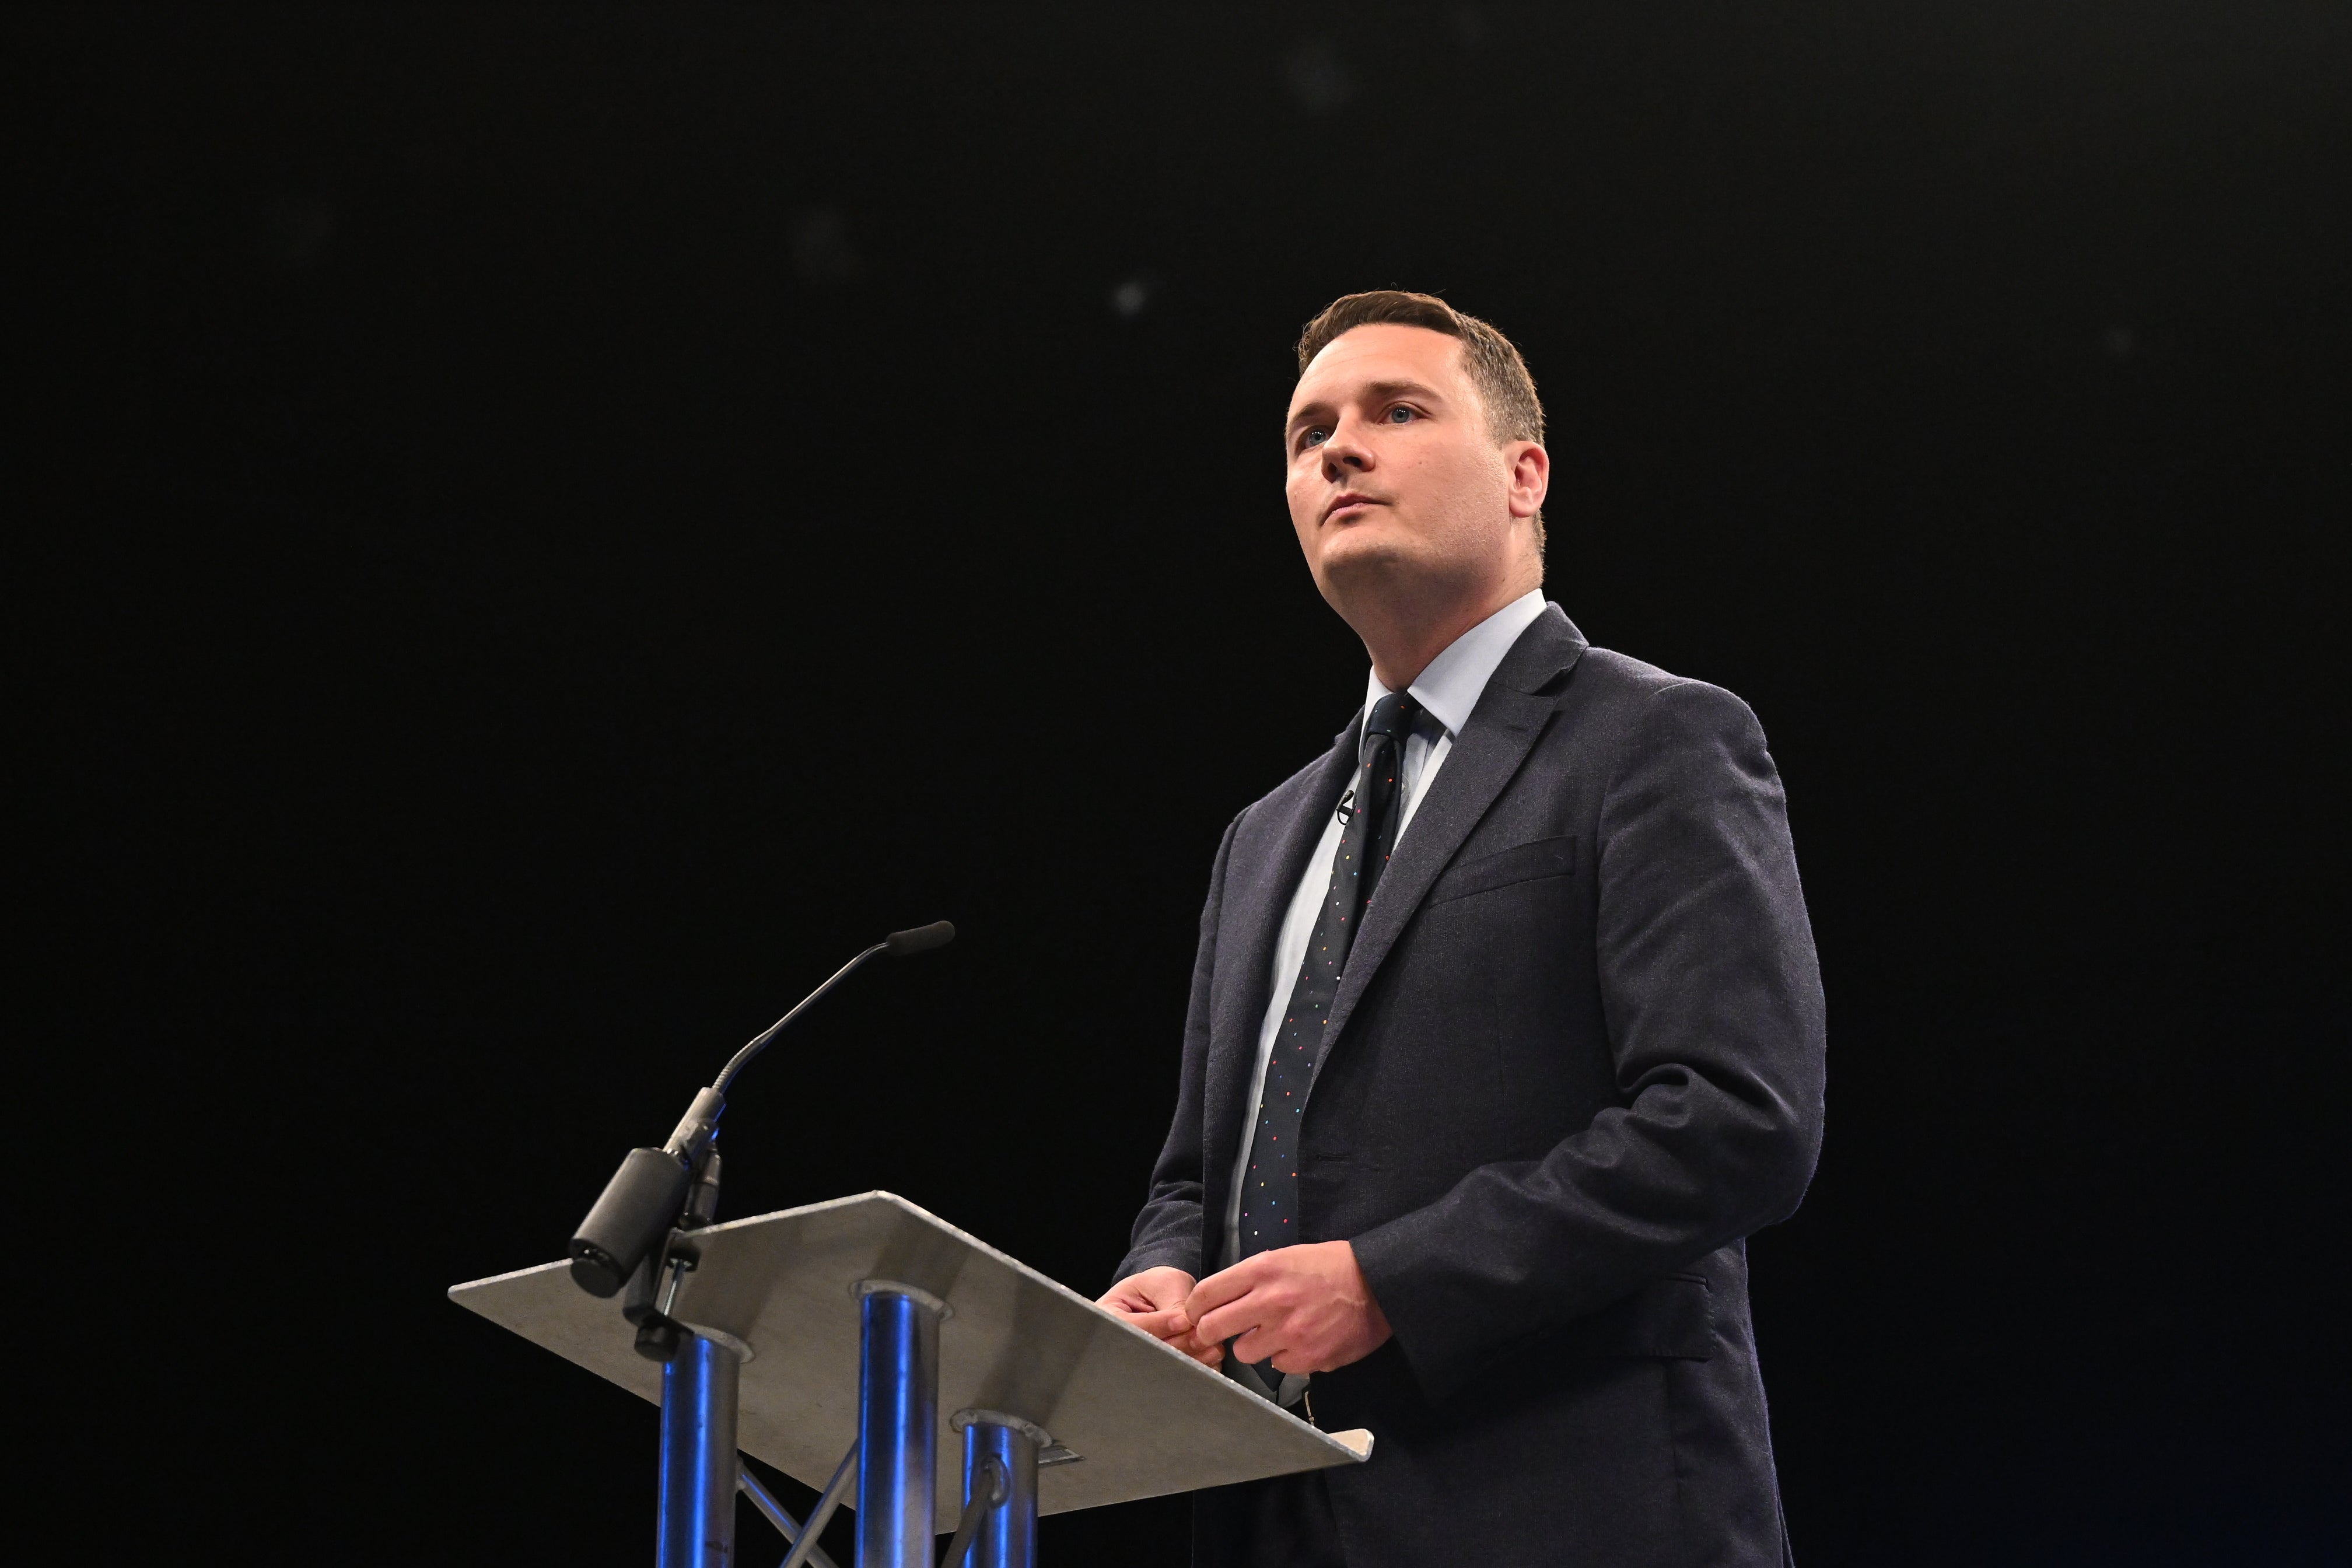 Wes Streeting hopes that soon he will be the new health secretary